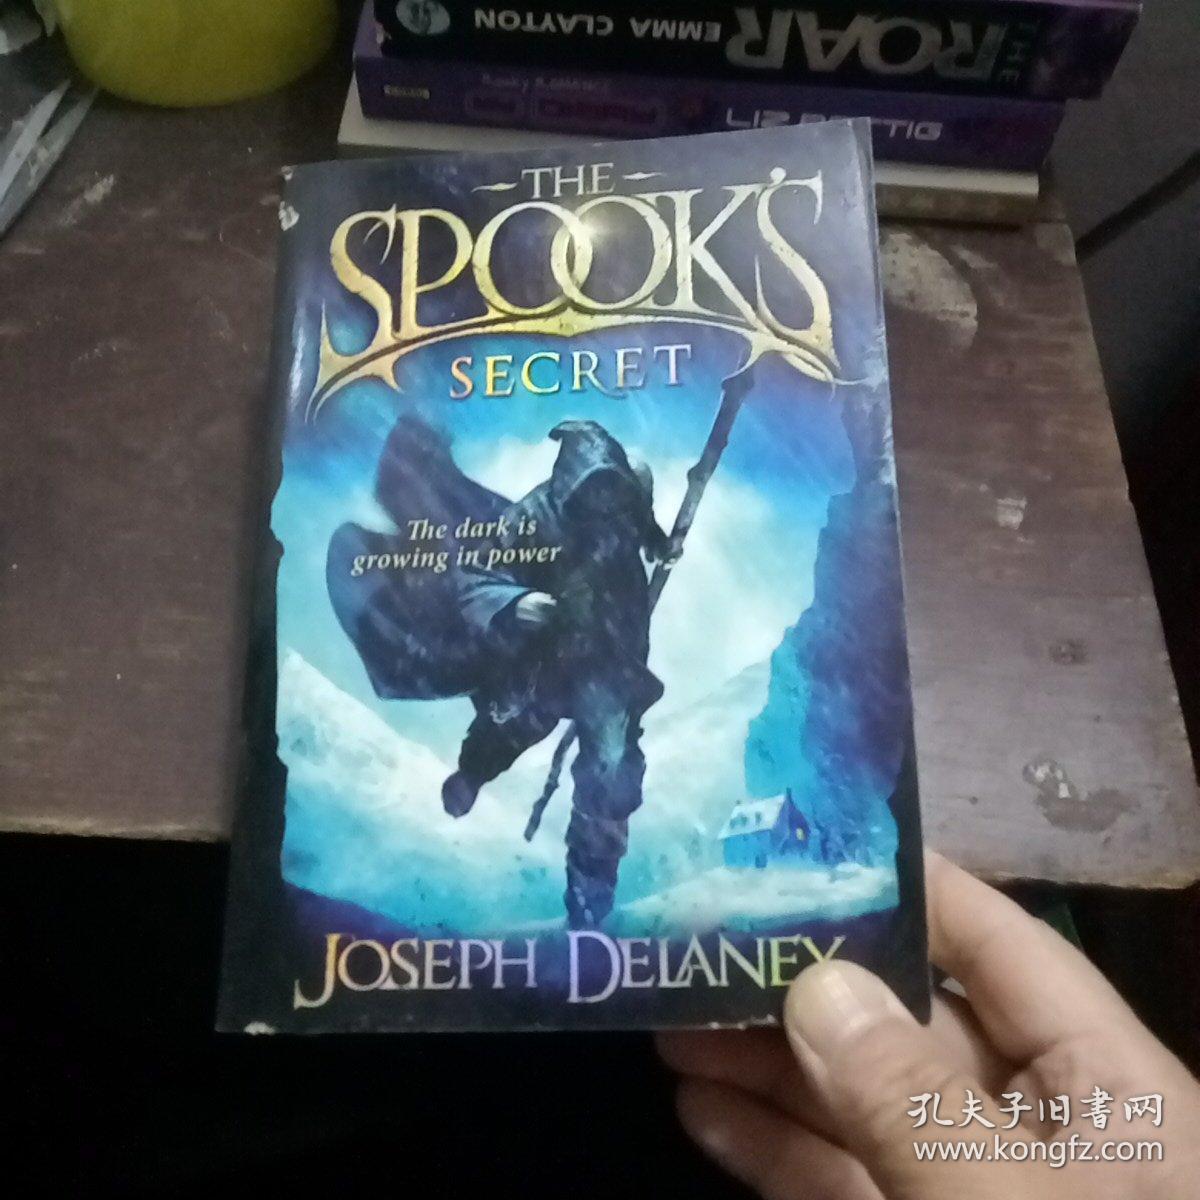 The Spook's Secret: Book 3 (The Wardstone Chronicles)